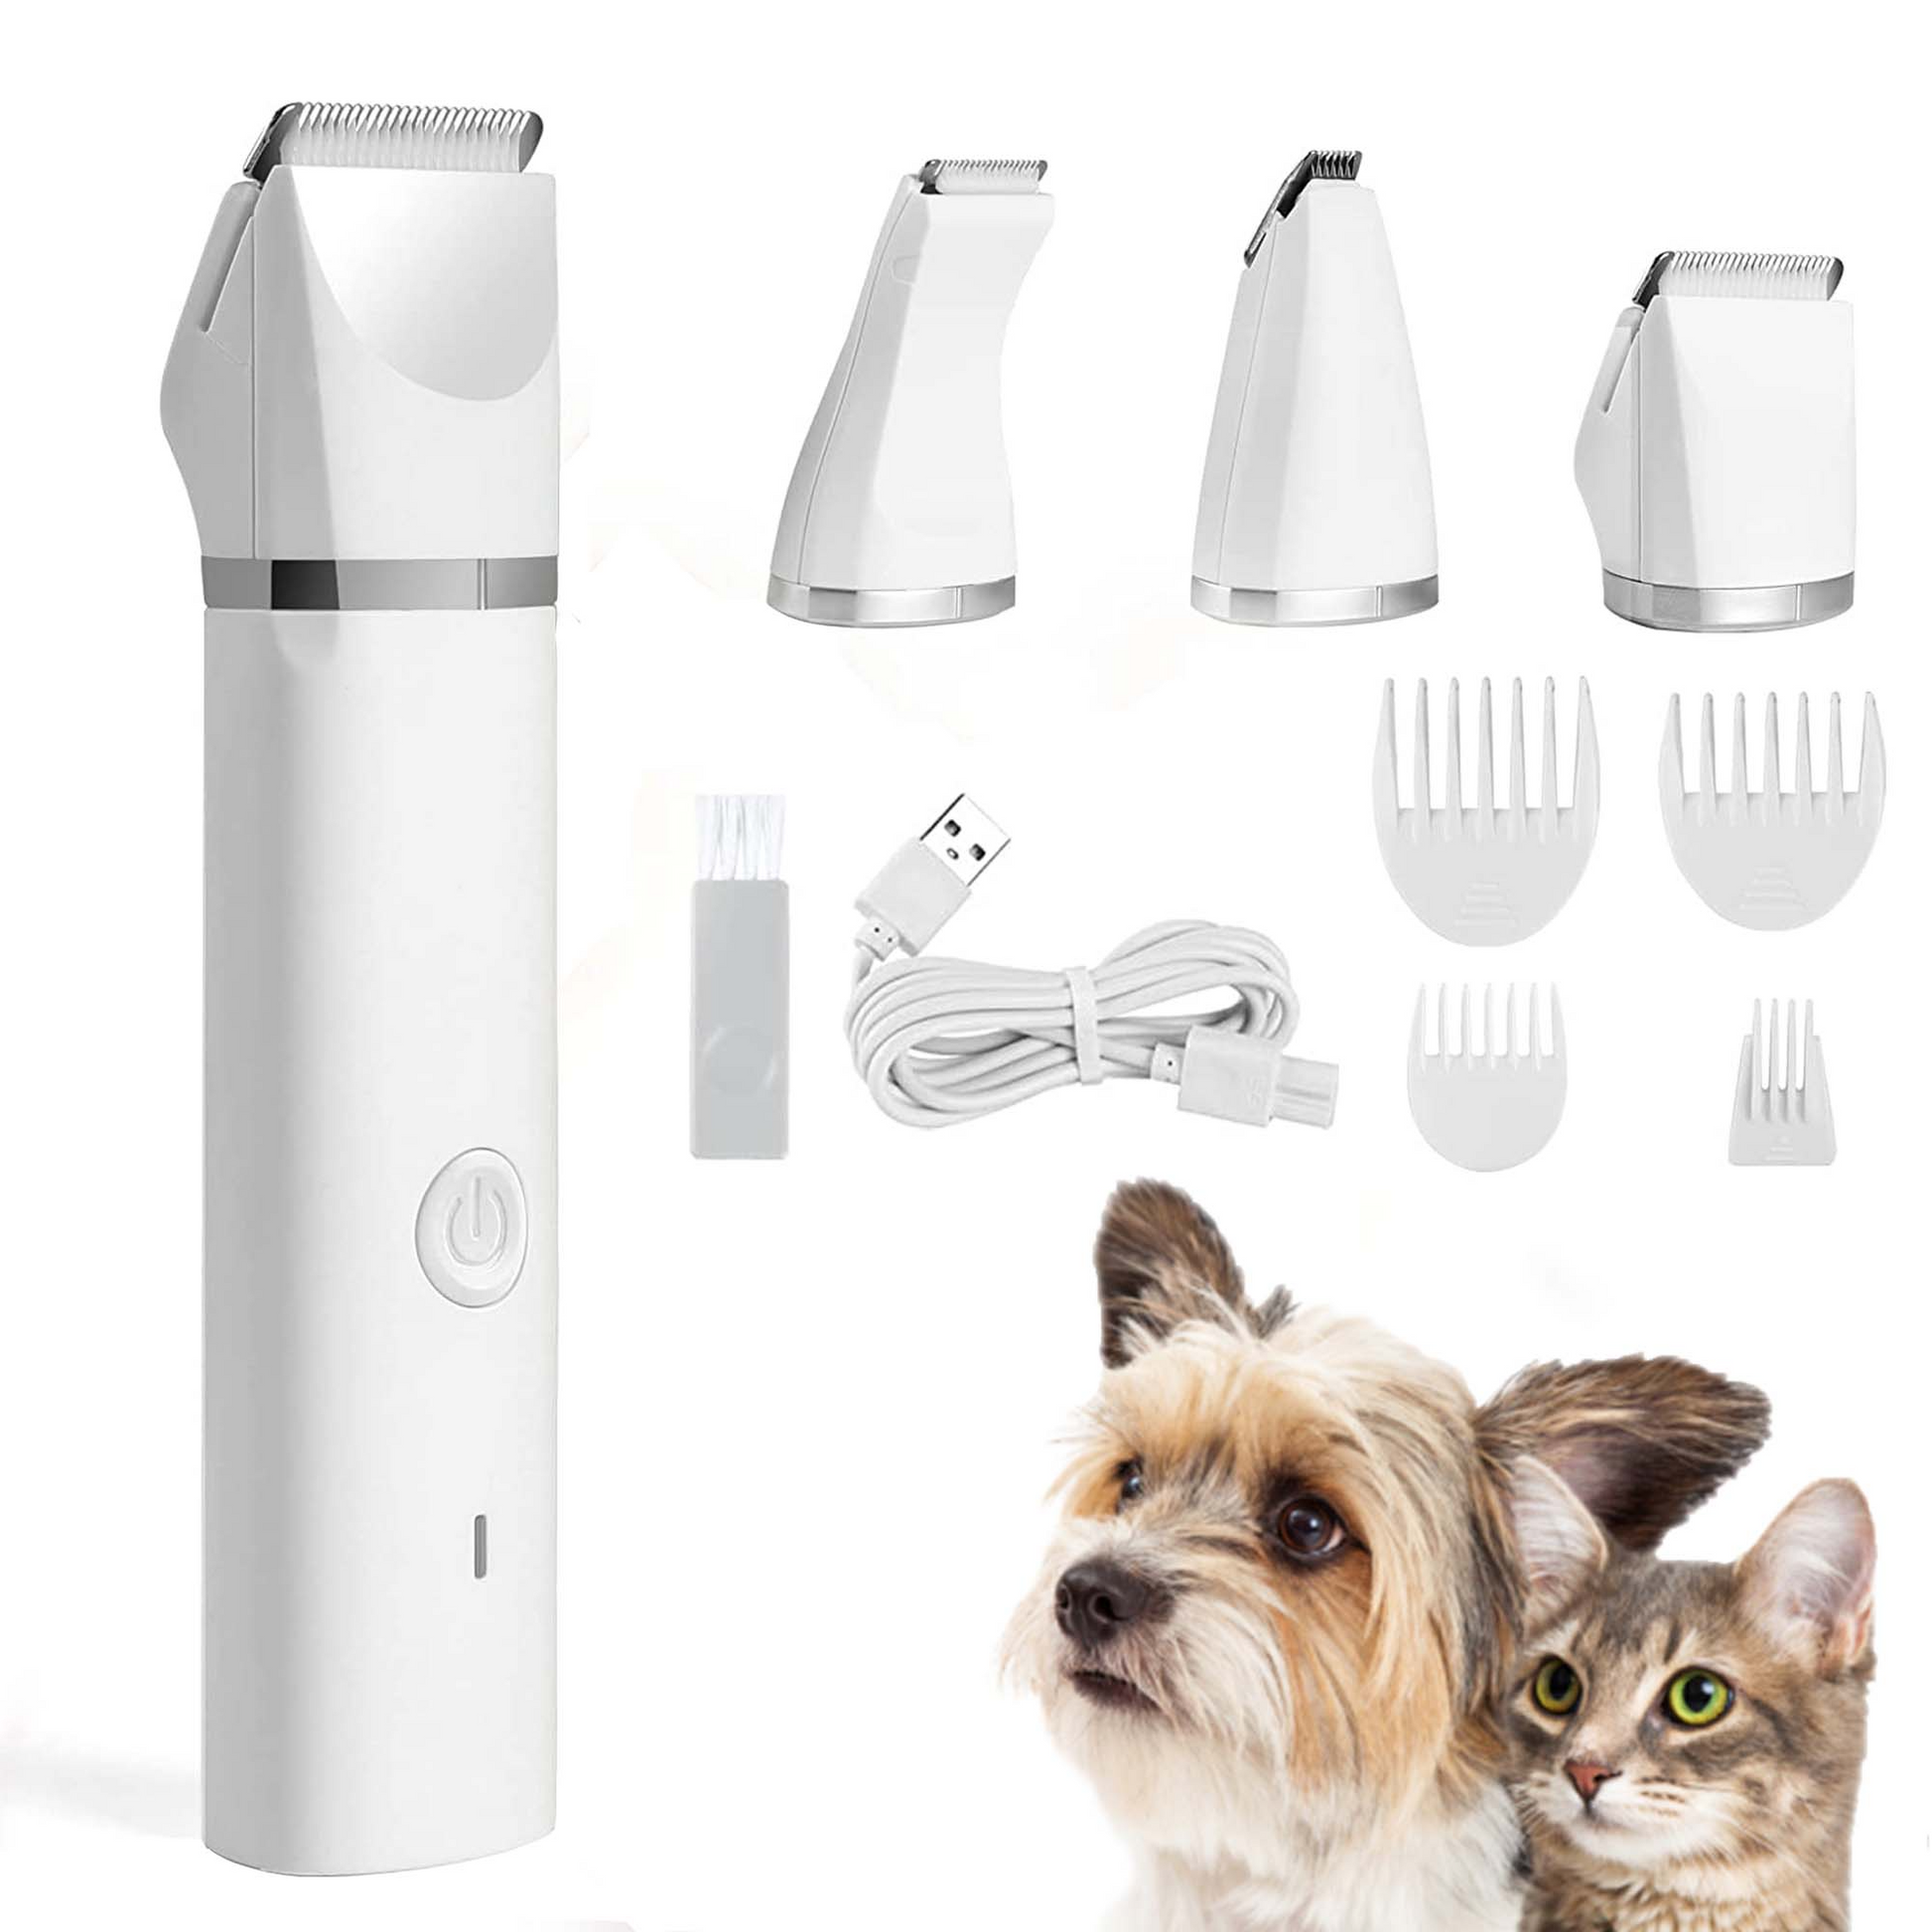 4 in 1 Pet Hair Clipper with 4 Blades Grooming Machine Trimmer & Nail Grinder Prefessional Haircut For Dogs Cats Drop Shipping - shoptrendbeast.com